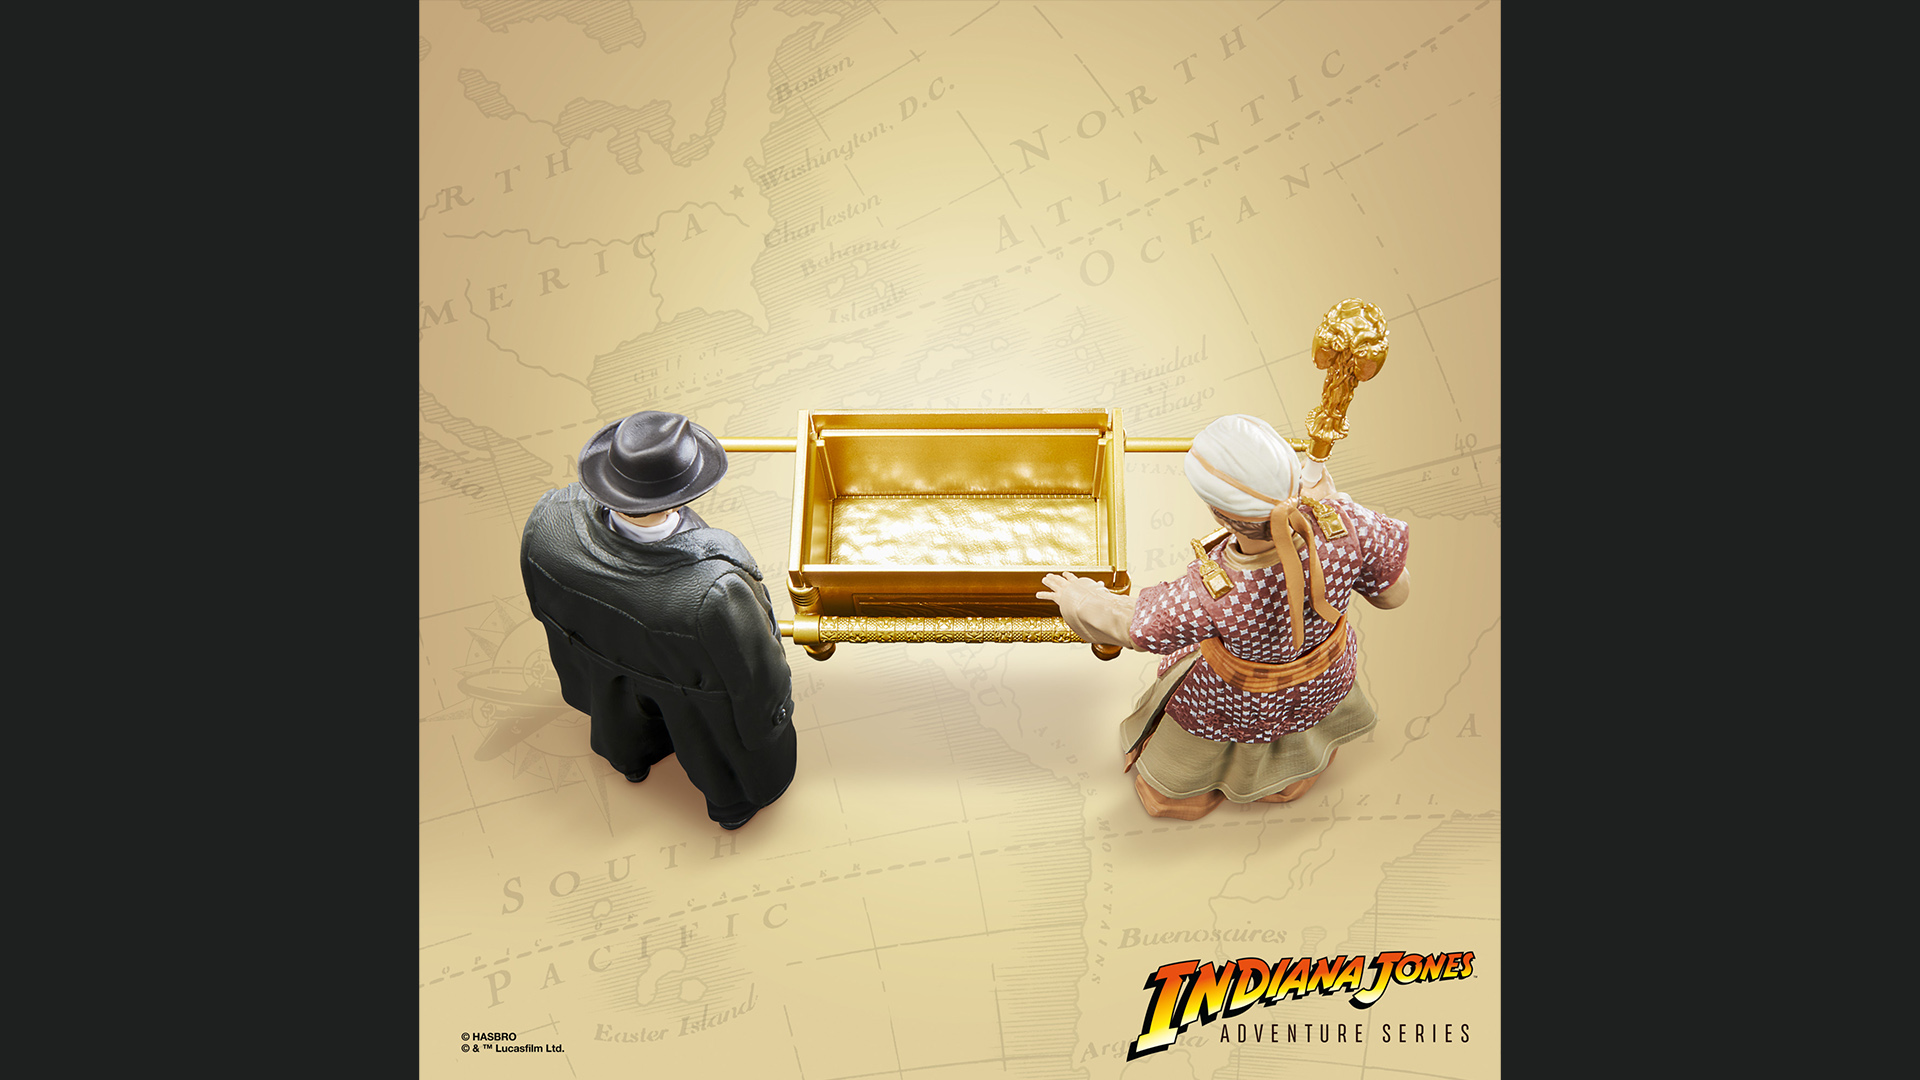 The Ark of the Covenant and Indiana Jones Action Figures